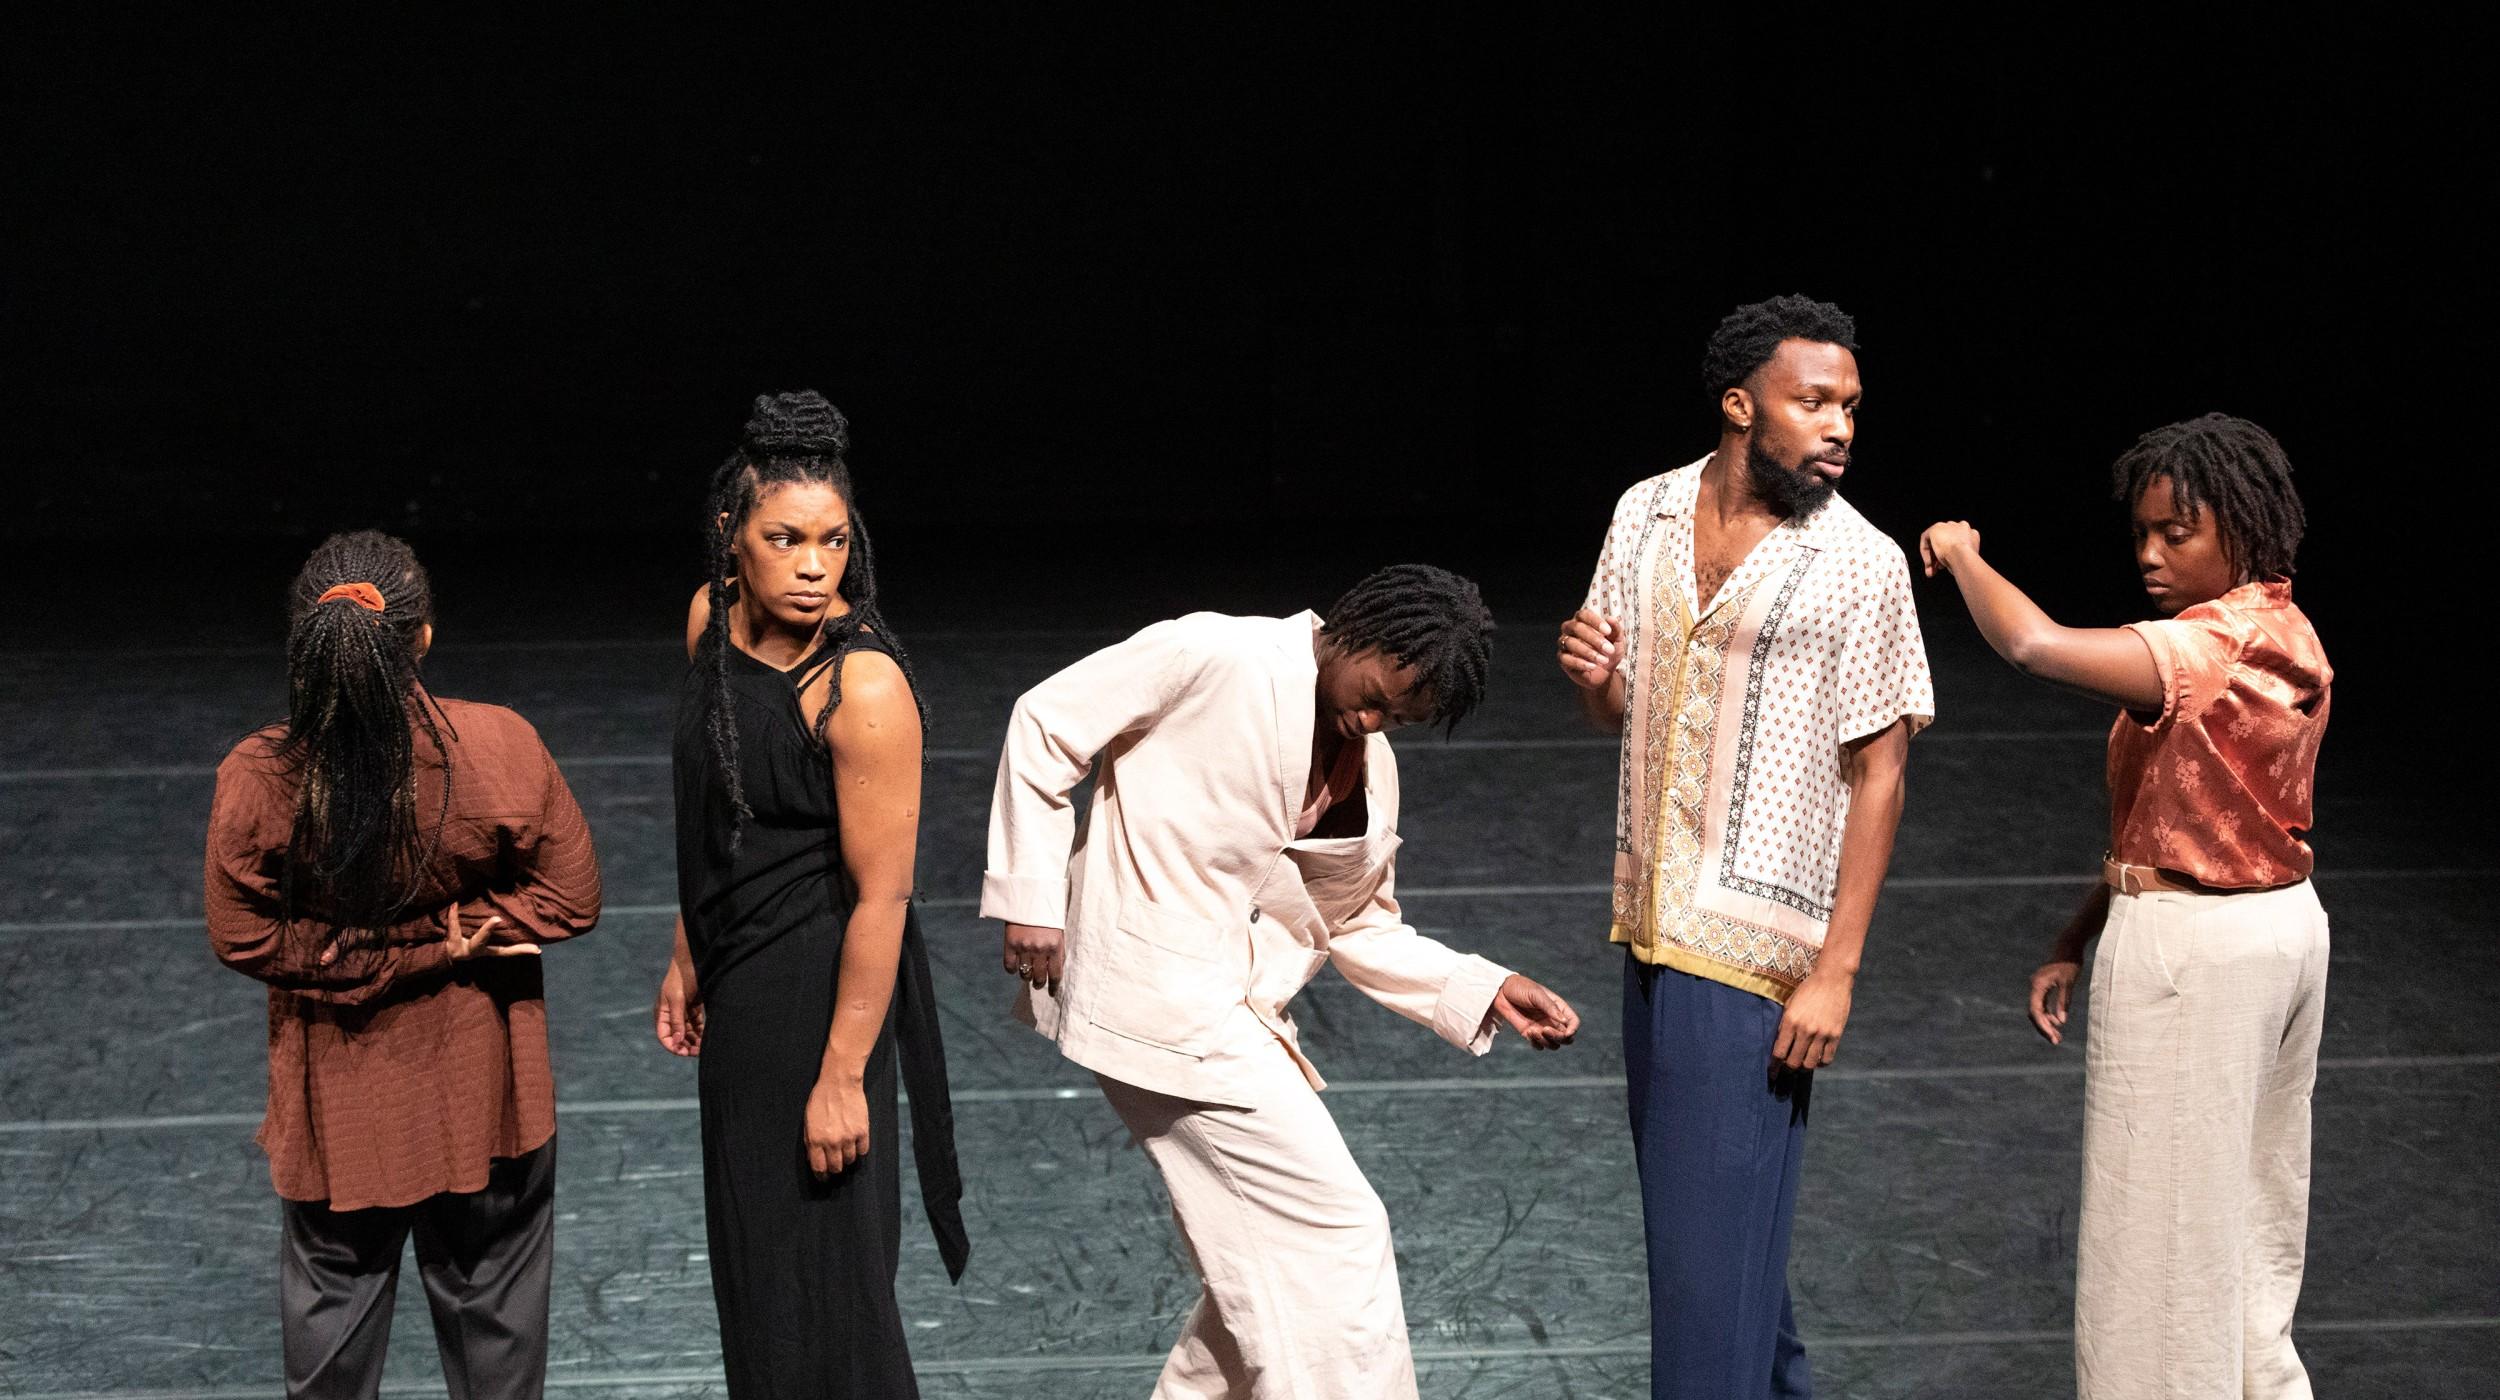 Haunting, dance and colonial legacies: A dance workshop with Seke Chimutengwende